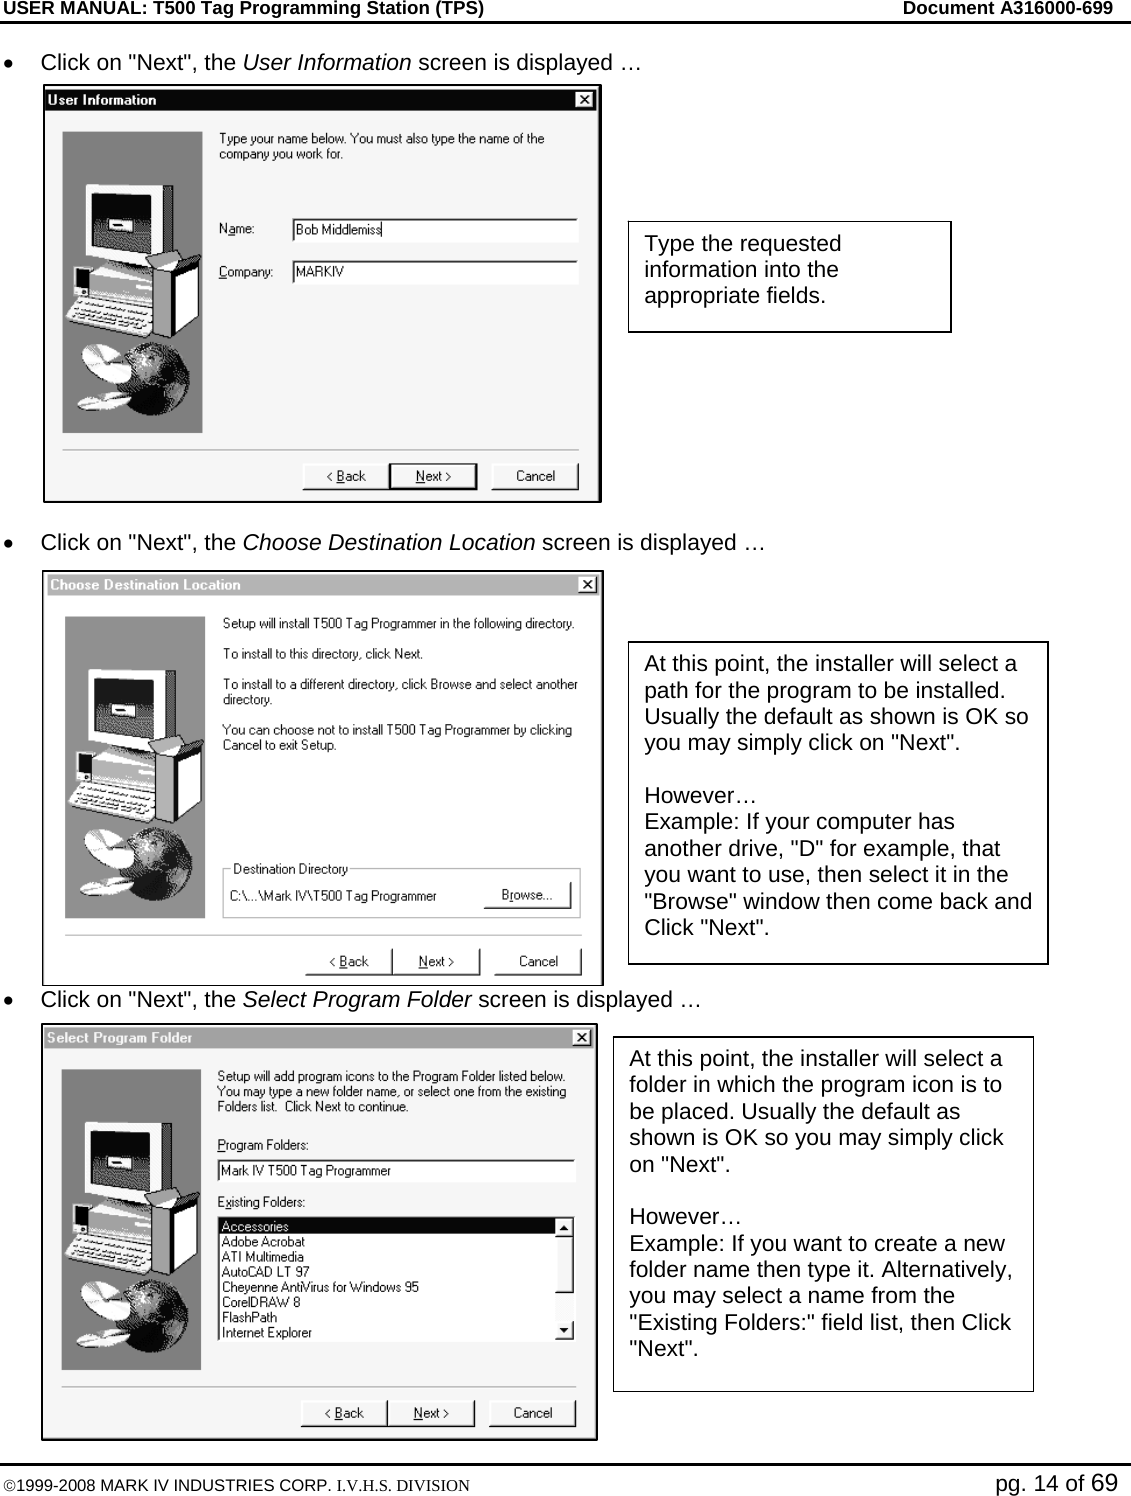 USER MANUAL: T500 Tag Programming Station (TPS)     Document A316000-699  ©1999-2008 MARK IV INDUSTRIES CORP. I.V.H.S. DIVISION   pg. 14 of 69 •  Click on &quot;Next&quot;, the User Information screen is displayed …  •  Click on &quot;Next&quot;, the Choose Destination Location screen is displayed … •  Click on &quot;Next&quot;, the Select Program Folder screen is displayed … Type the requested information into the appropriate fields. At this point, the installer will select a path for the program to be installed. Usually the default as shown is OK so you may simply click on &quot;Next&quot;.  However… Example: If your computer has another drive, &quot;D&quot; for example, that you want to use, then select it in the &quot;Browse&quot; window then come back and Click &quot;Next&quot;. At this point, the installer will select a folder in which the program icon is to be placed. Usually the default as shown is OK so you may simply click on &quot;Next&quot;.  However… Example: If you want to create a new folder name then type it. Alternatively, you may select a name from the &quot;Existing Folders:&quot; field list, then Click &quot;Next&quot;. 